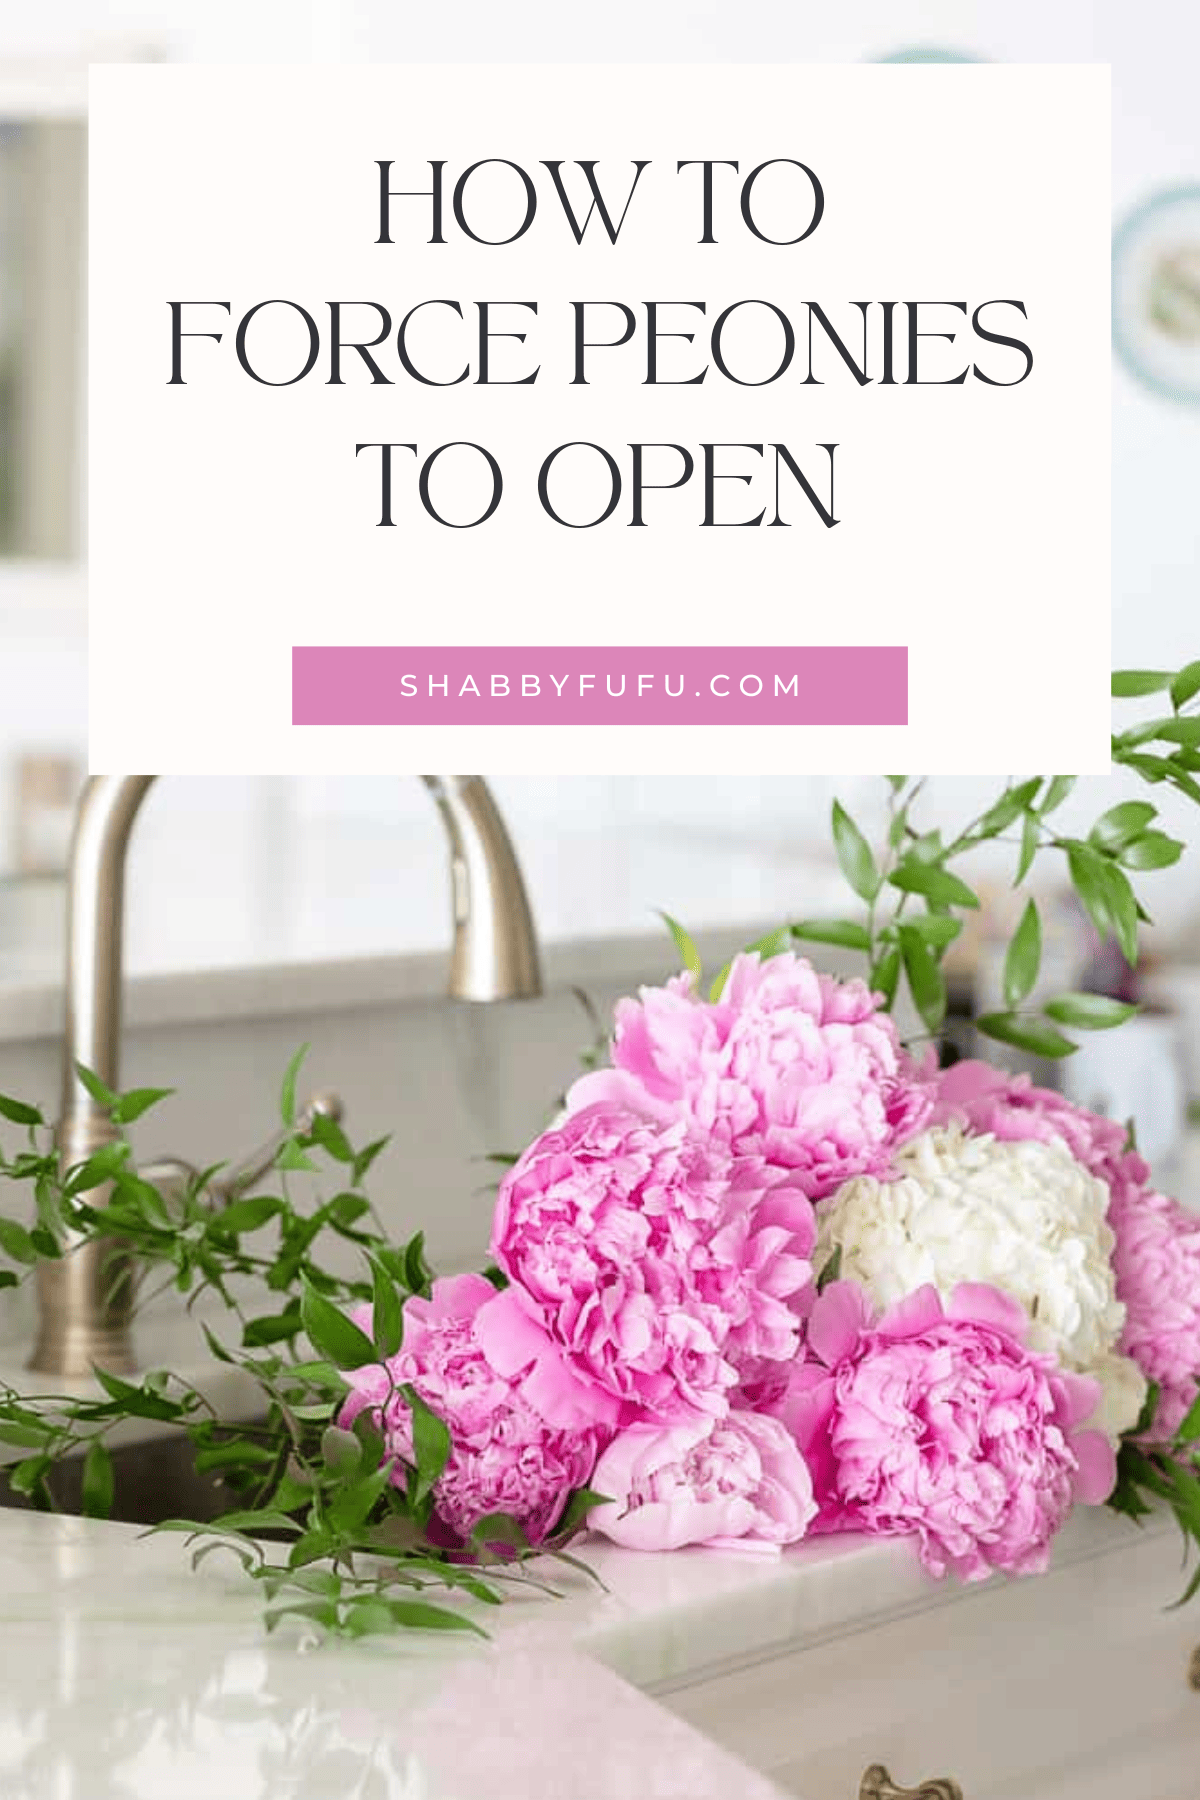 decorative graphic for Pinterest titled "How to force peonies to open"